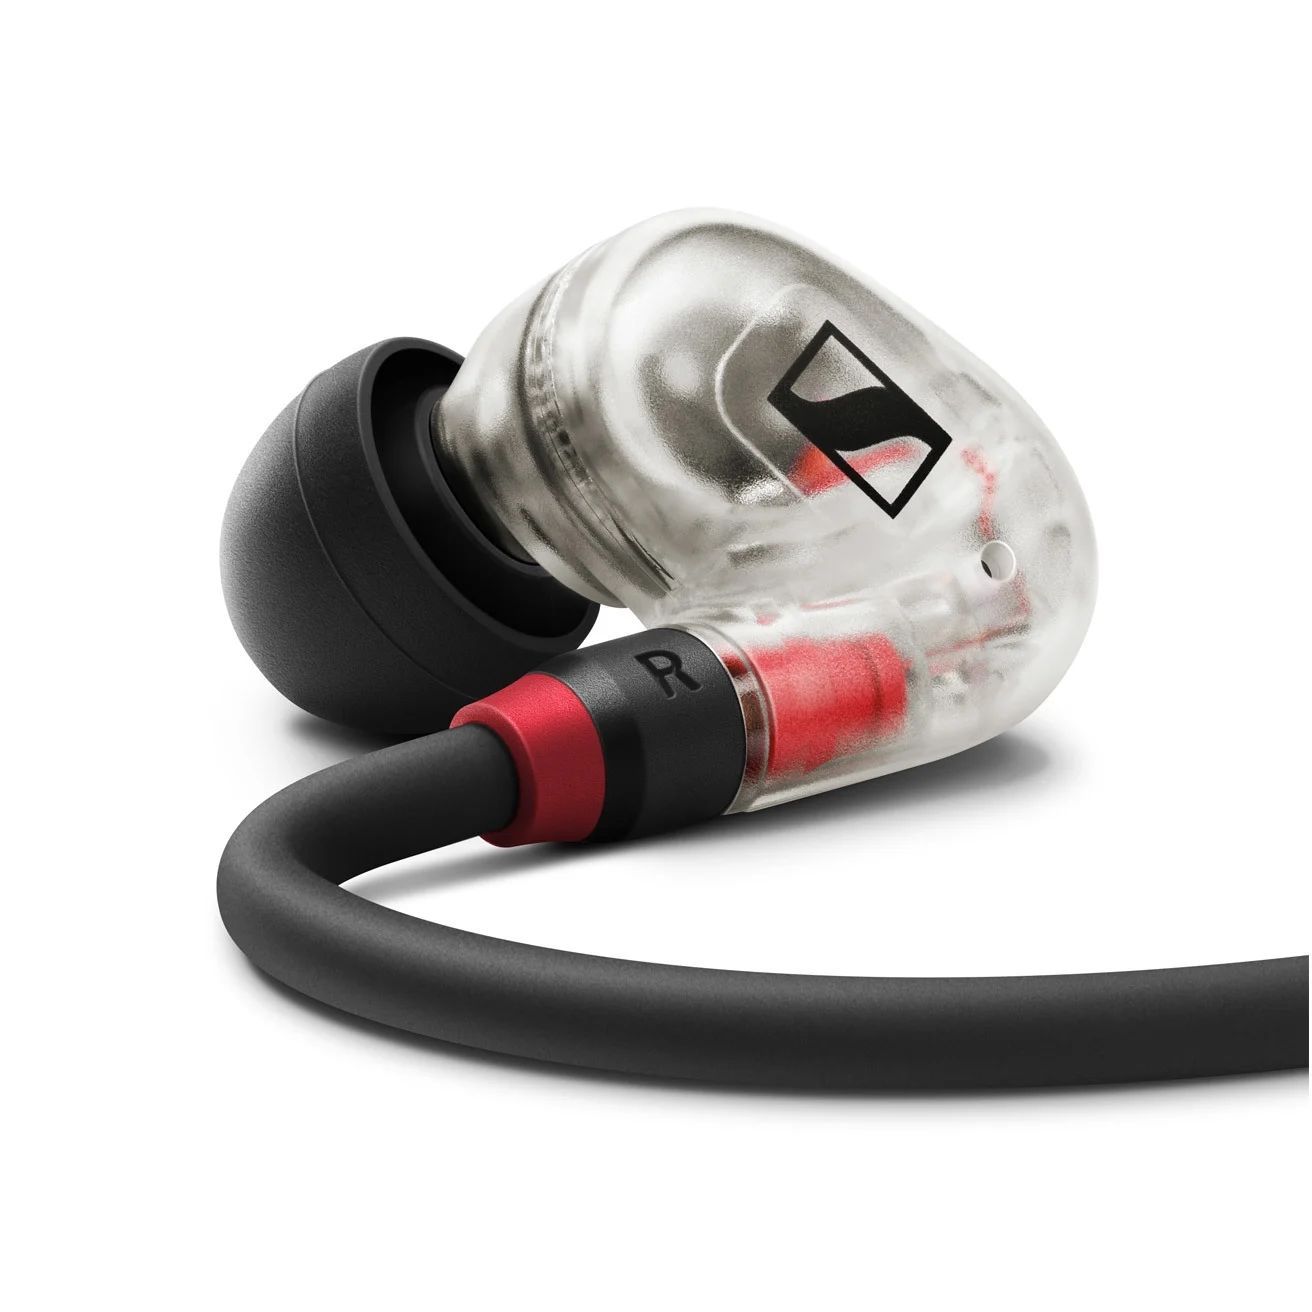 Sennheiser IE 100 Pro Clear Dynamische In-Ear-Monitoring-Hörer Farbe:transparent